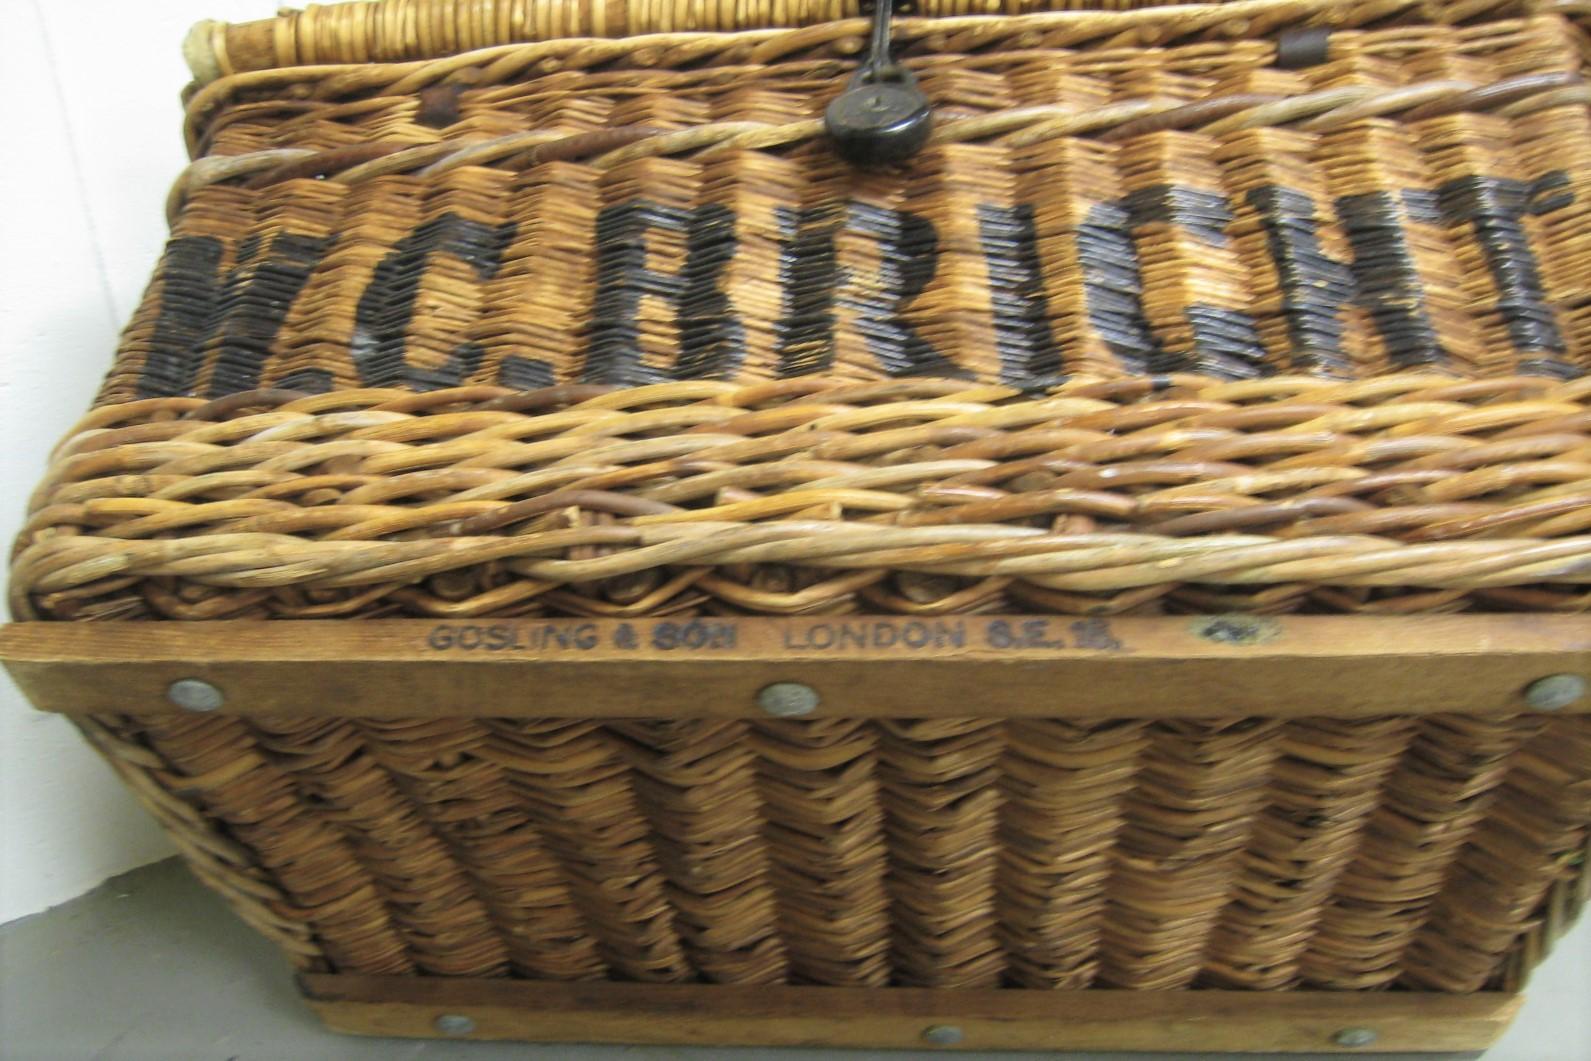 Arts and Crafts English Linen Basket circa 1920 Vintage Wicker Basket W.C. Bright For Sale